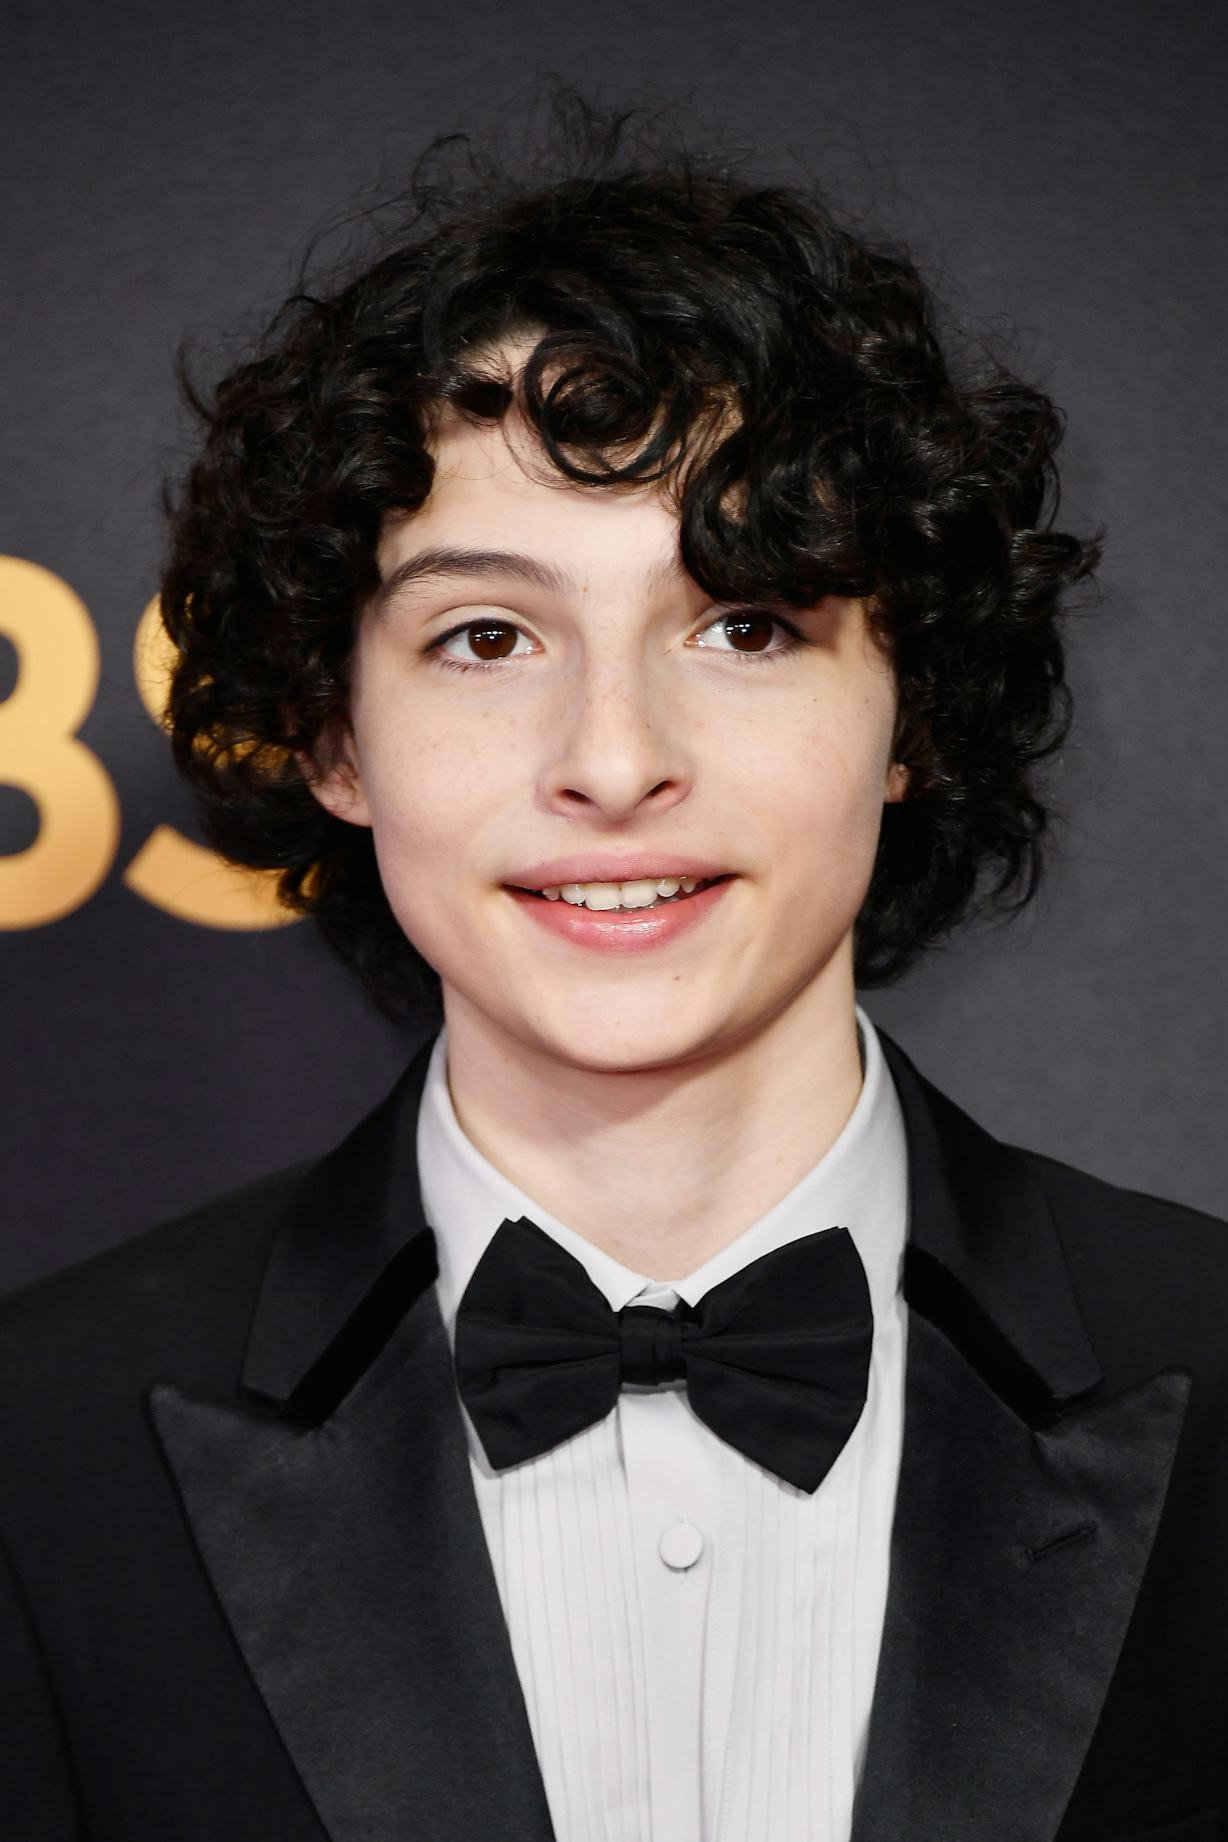 Stranger Things Star Finn Wolfhard Fires Agent After Sexual Abuse Allegations Surface